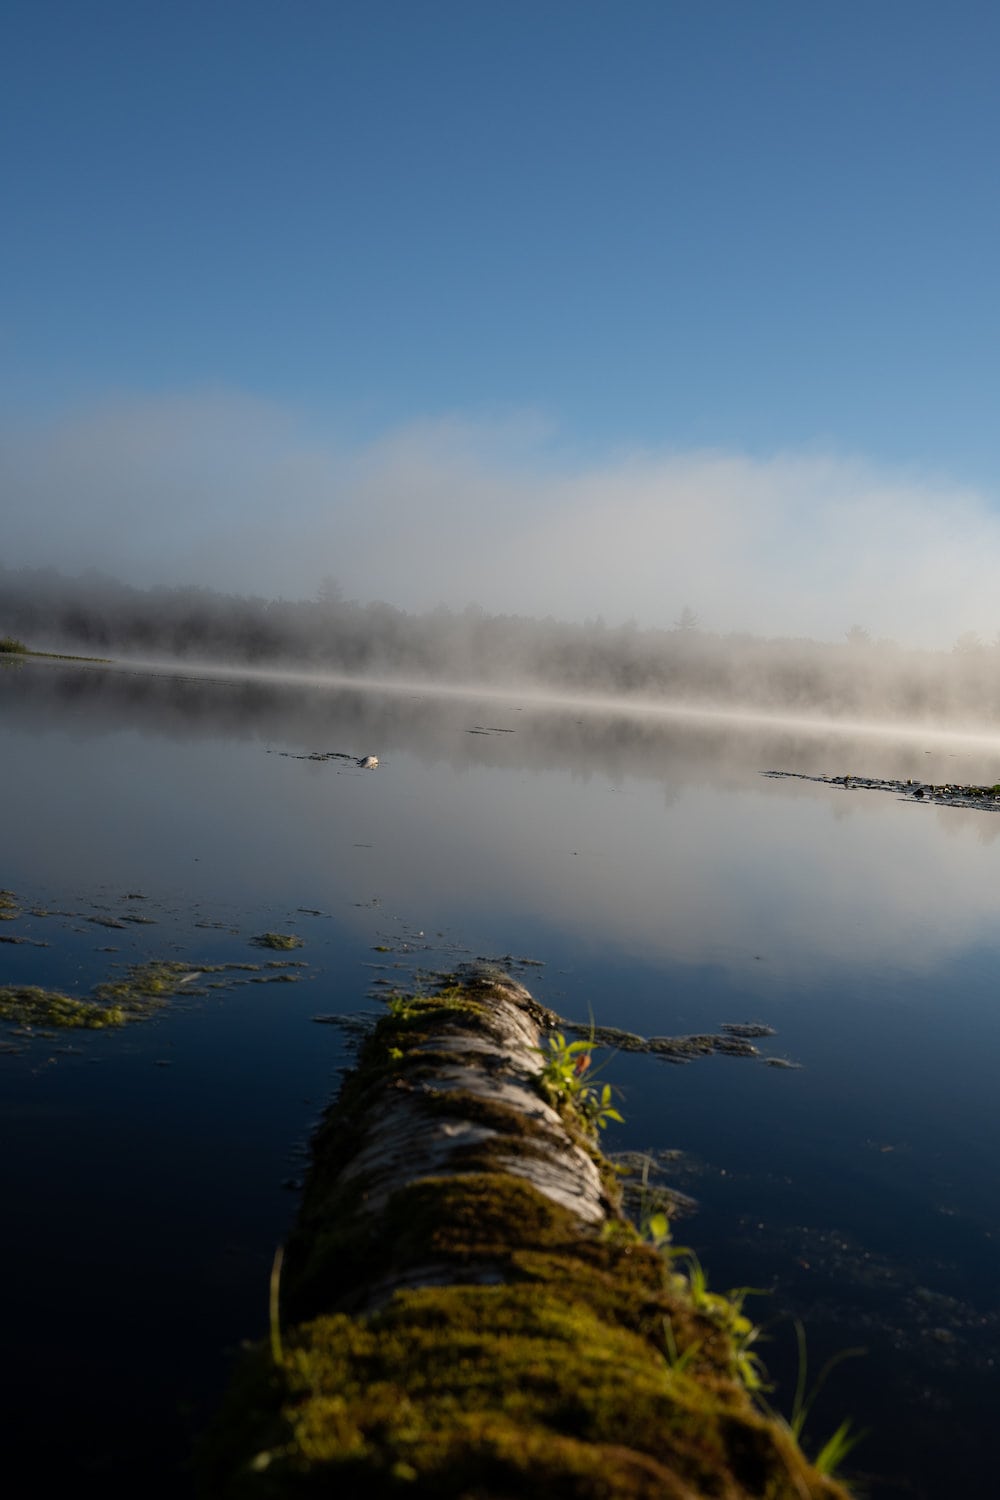 Photograph of fog over a lake, un edited, color and contrast are flat.